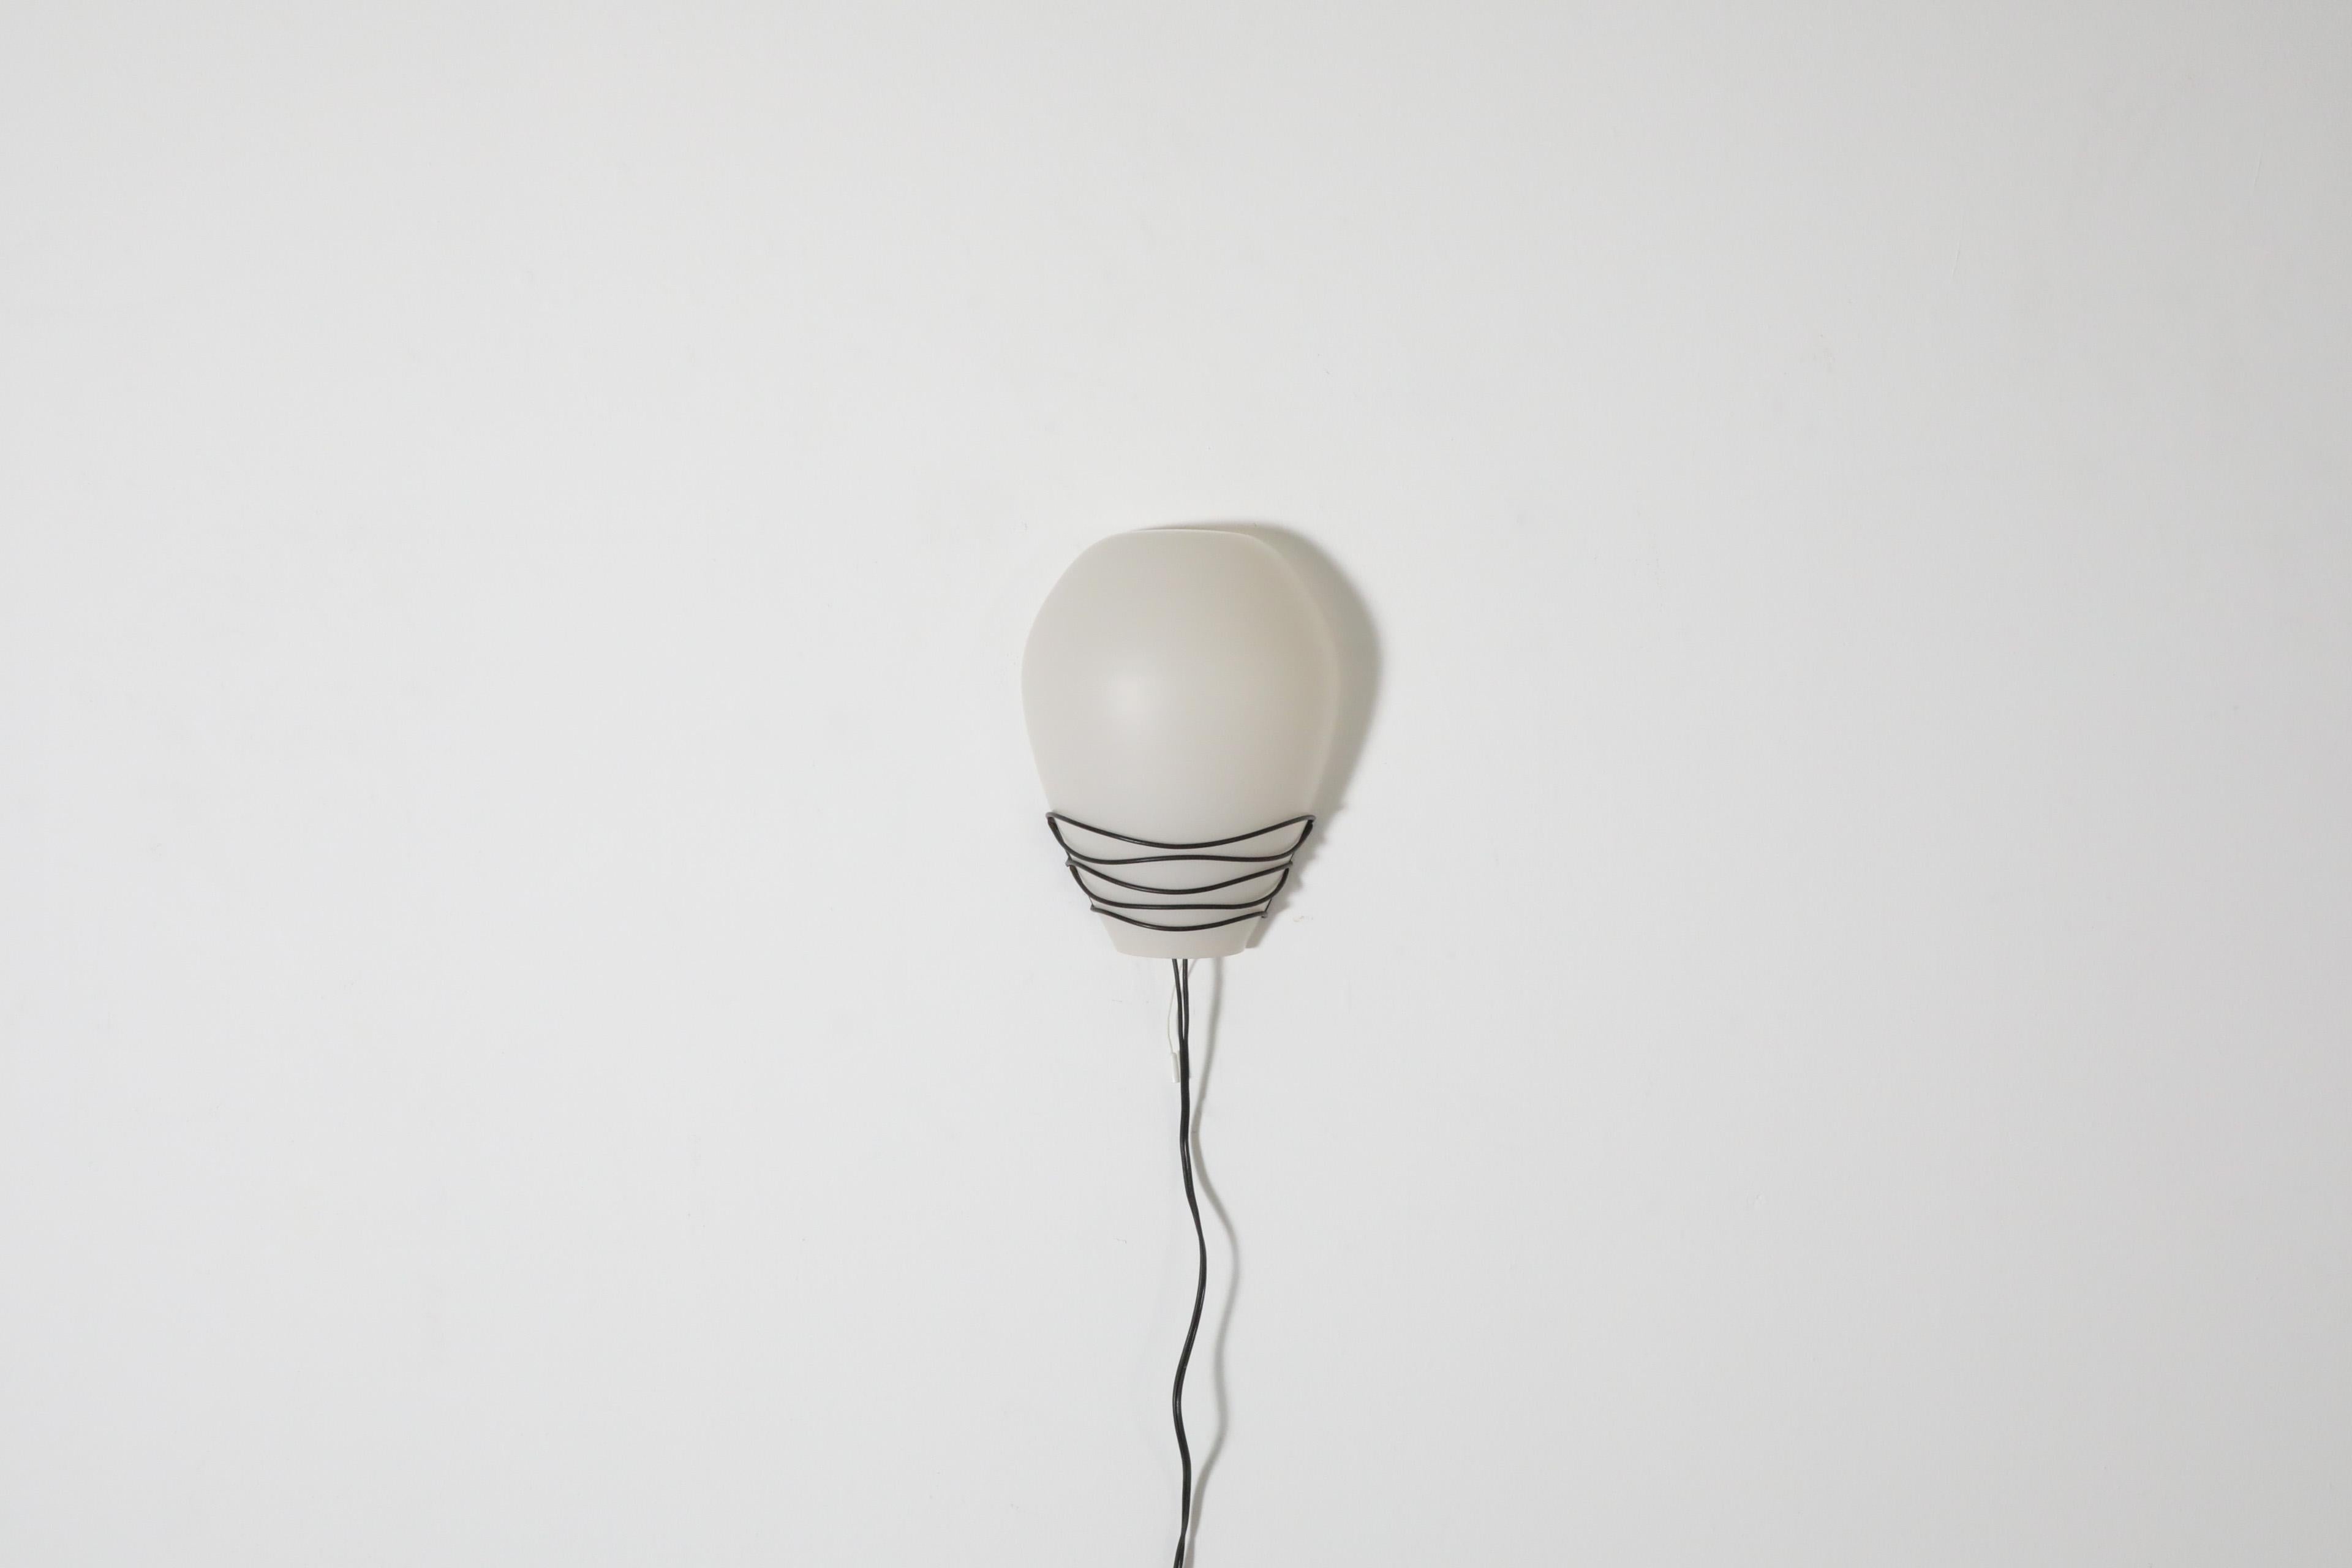 Mid-Century Philips 'NX20' wall sconce with decorative black wire frame and removable milk glass shade. A stylish pairing of glass and wire in original condition with visible wear consistent with its age and use.